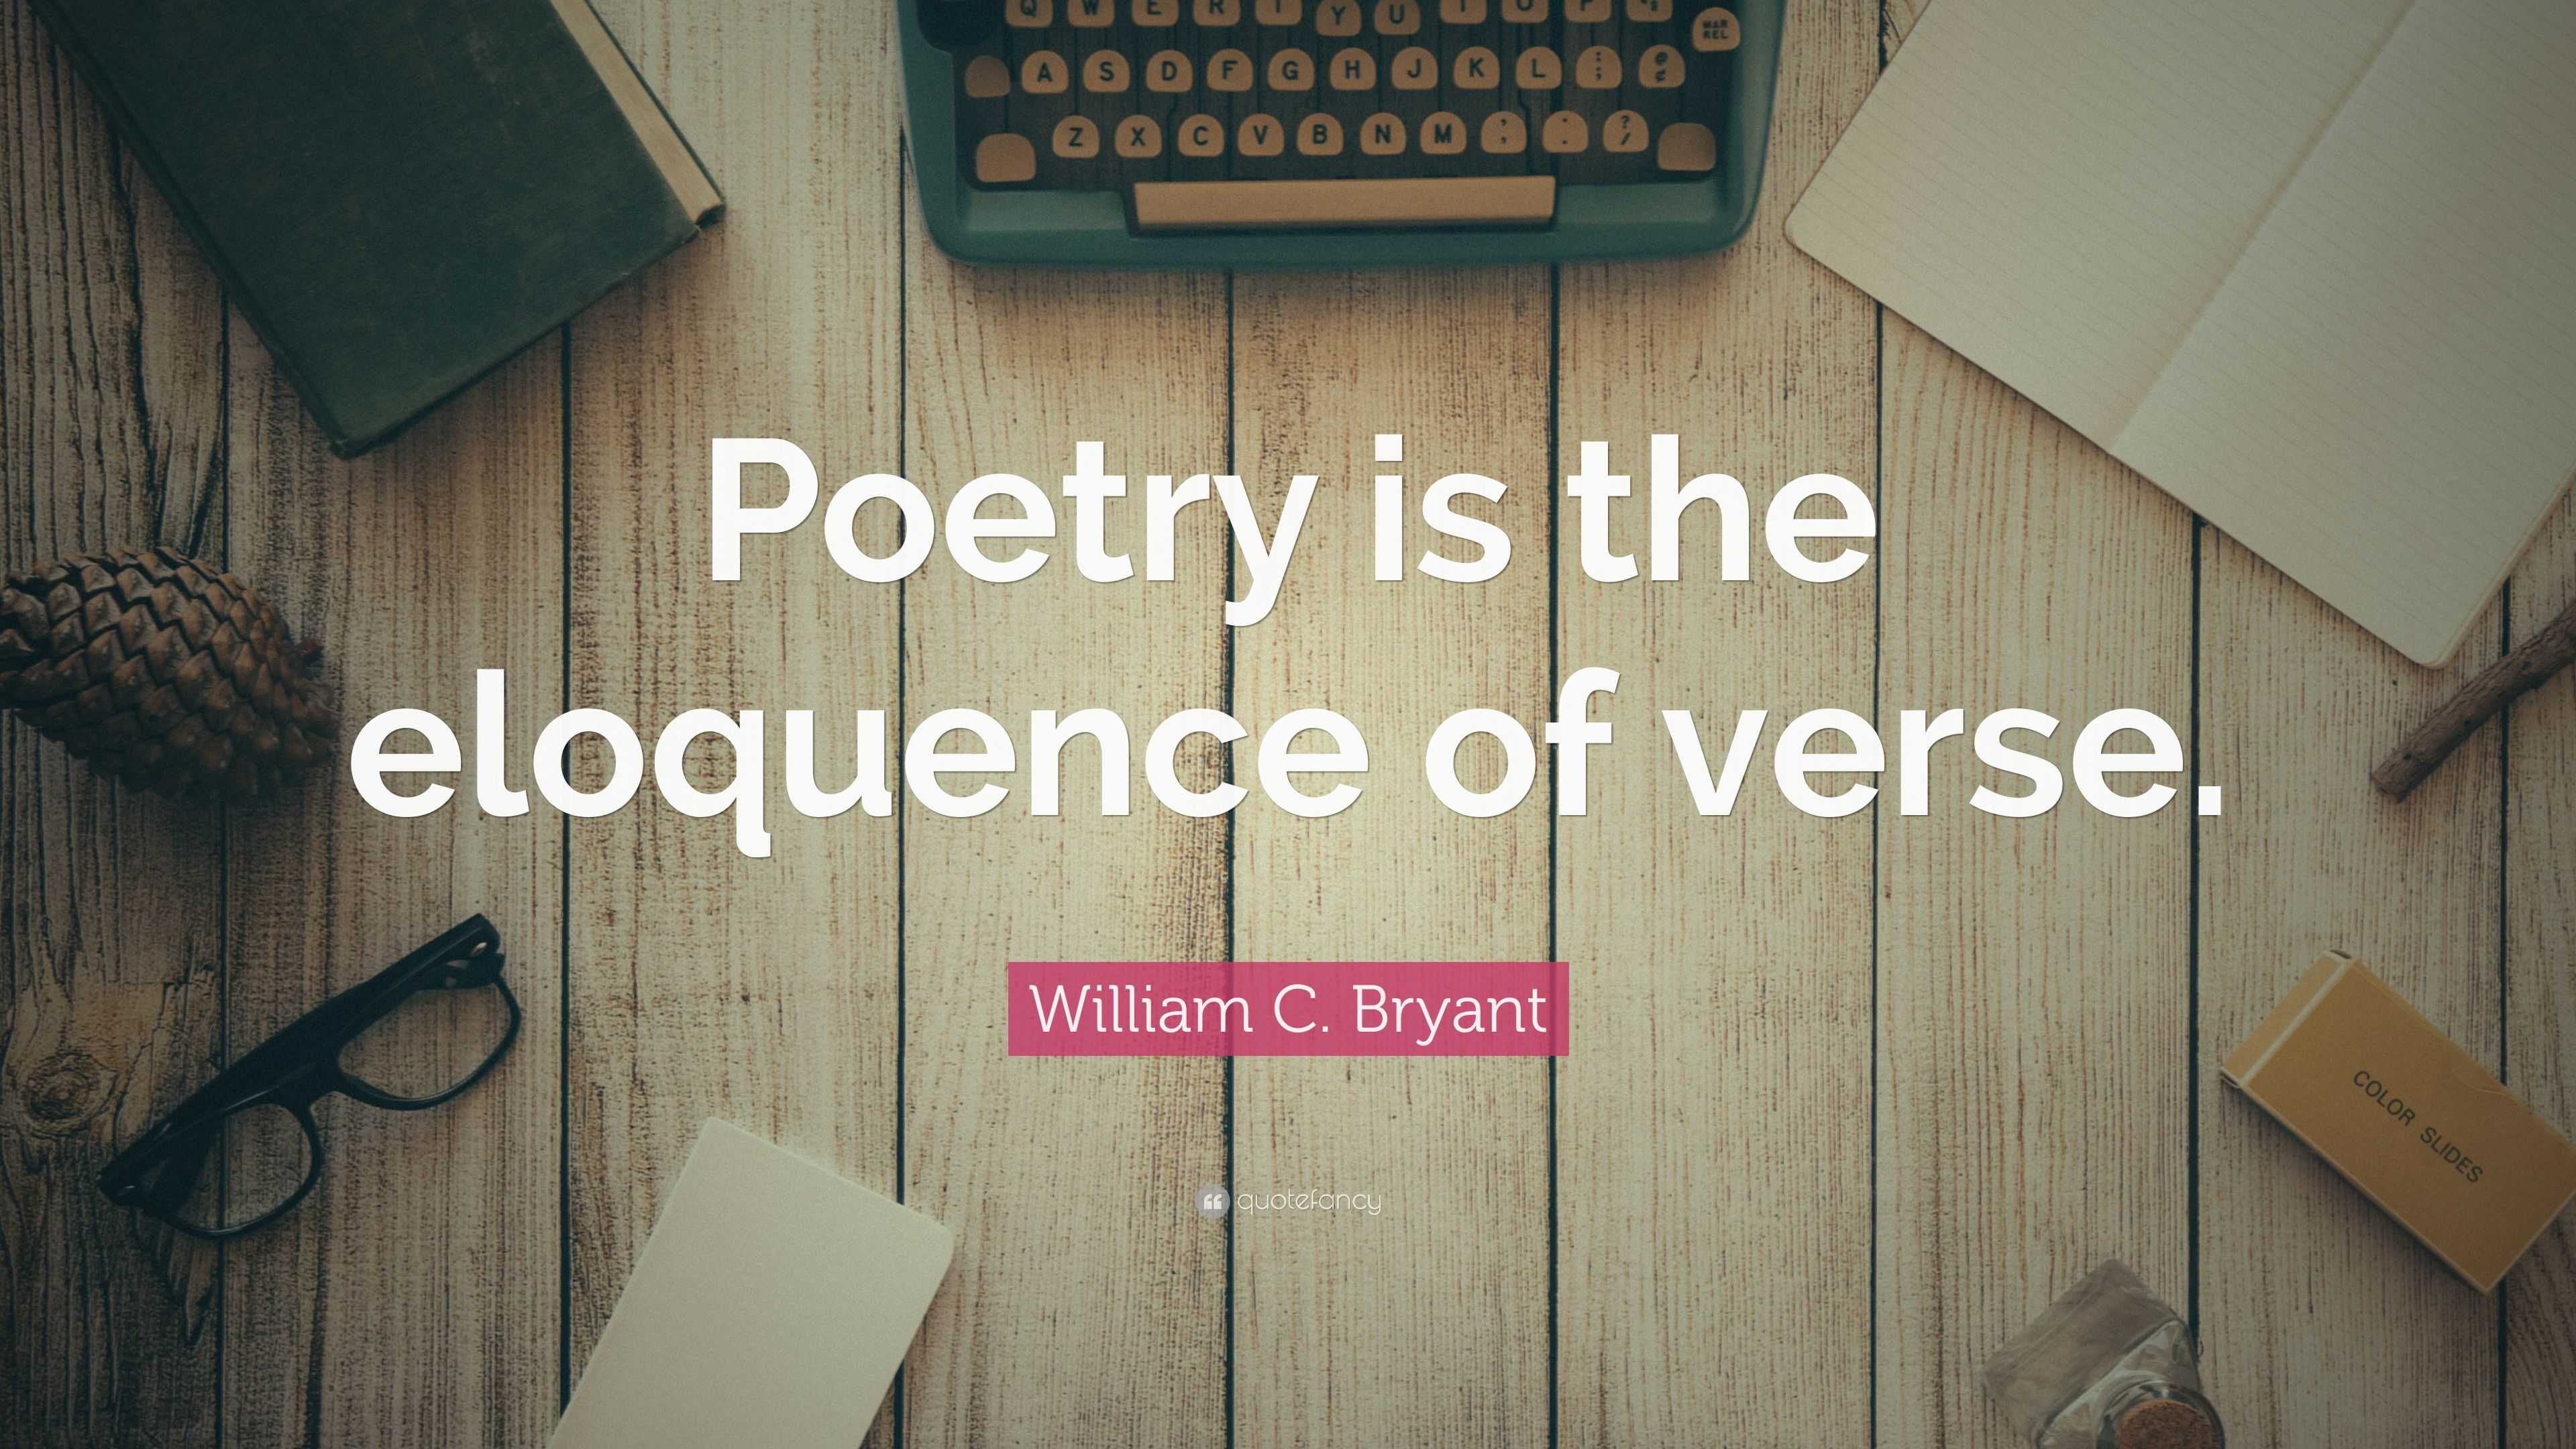 William C. Bryant Quote: “Poetry is the eloquence of verse.”